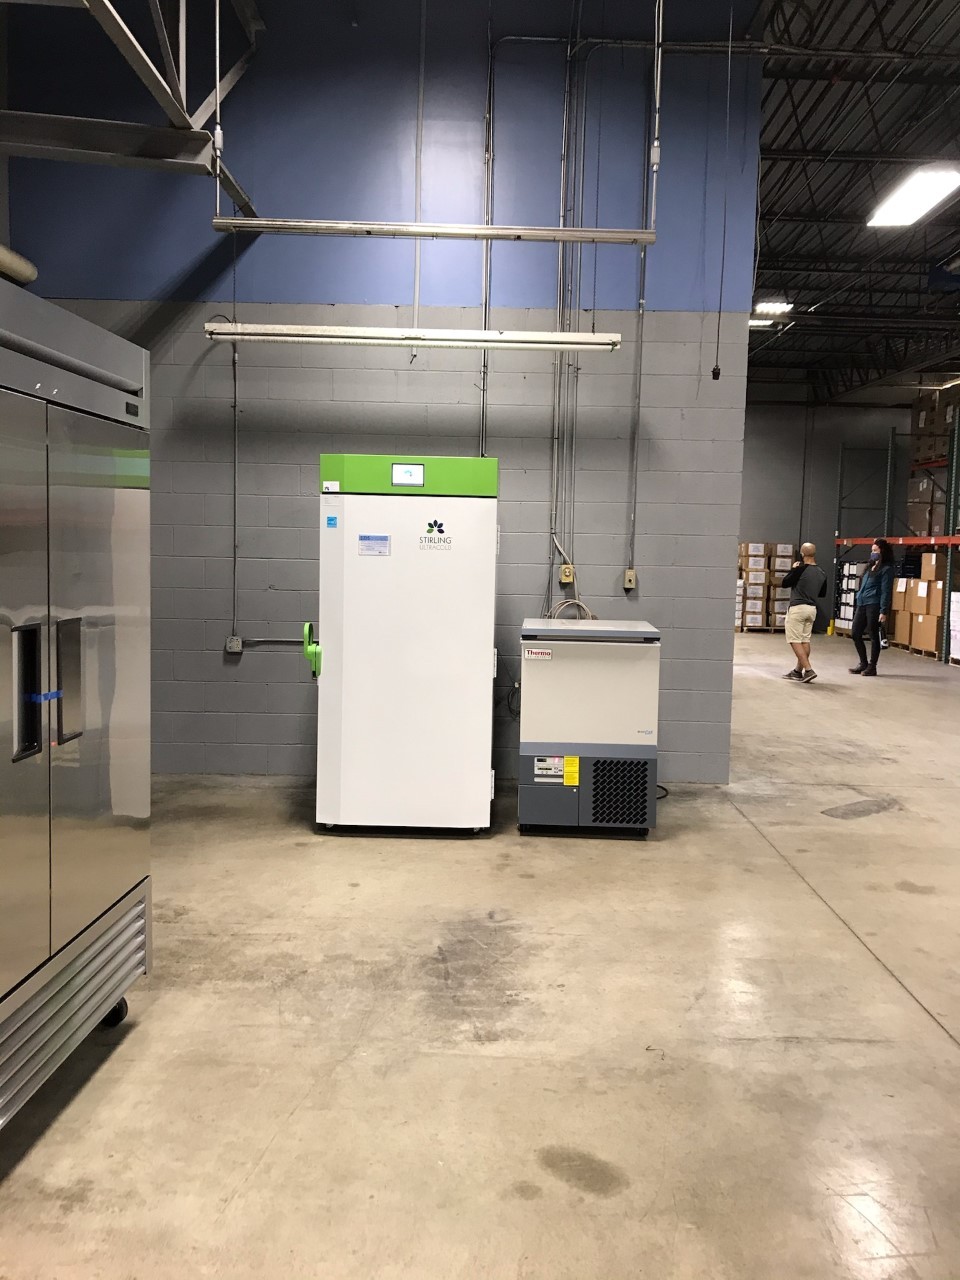 UNE's ultra-cold freezer, on loan to the Maine CDC, sits in a secure facility